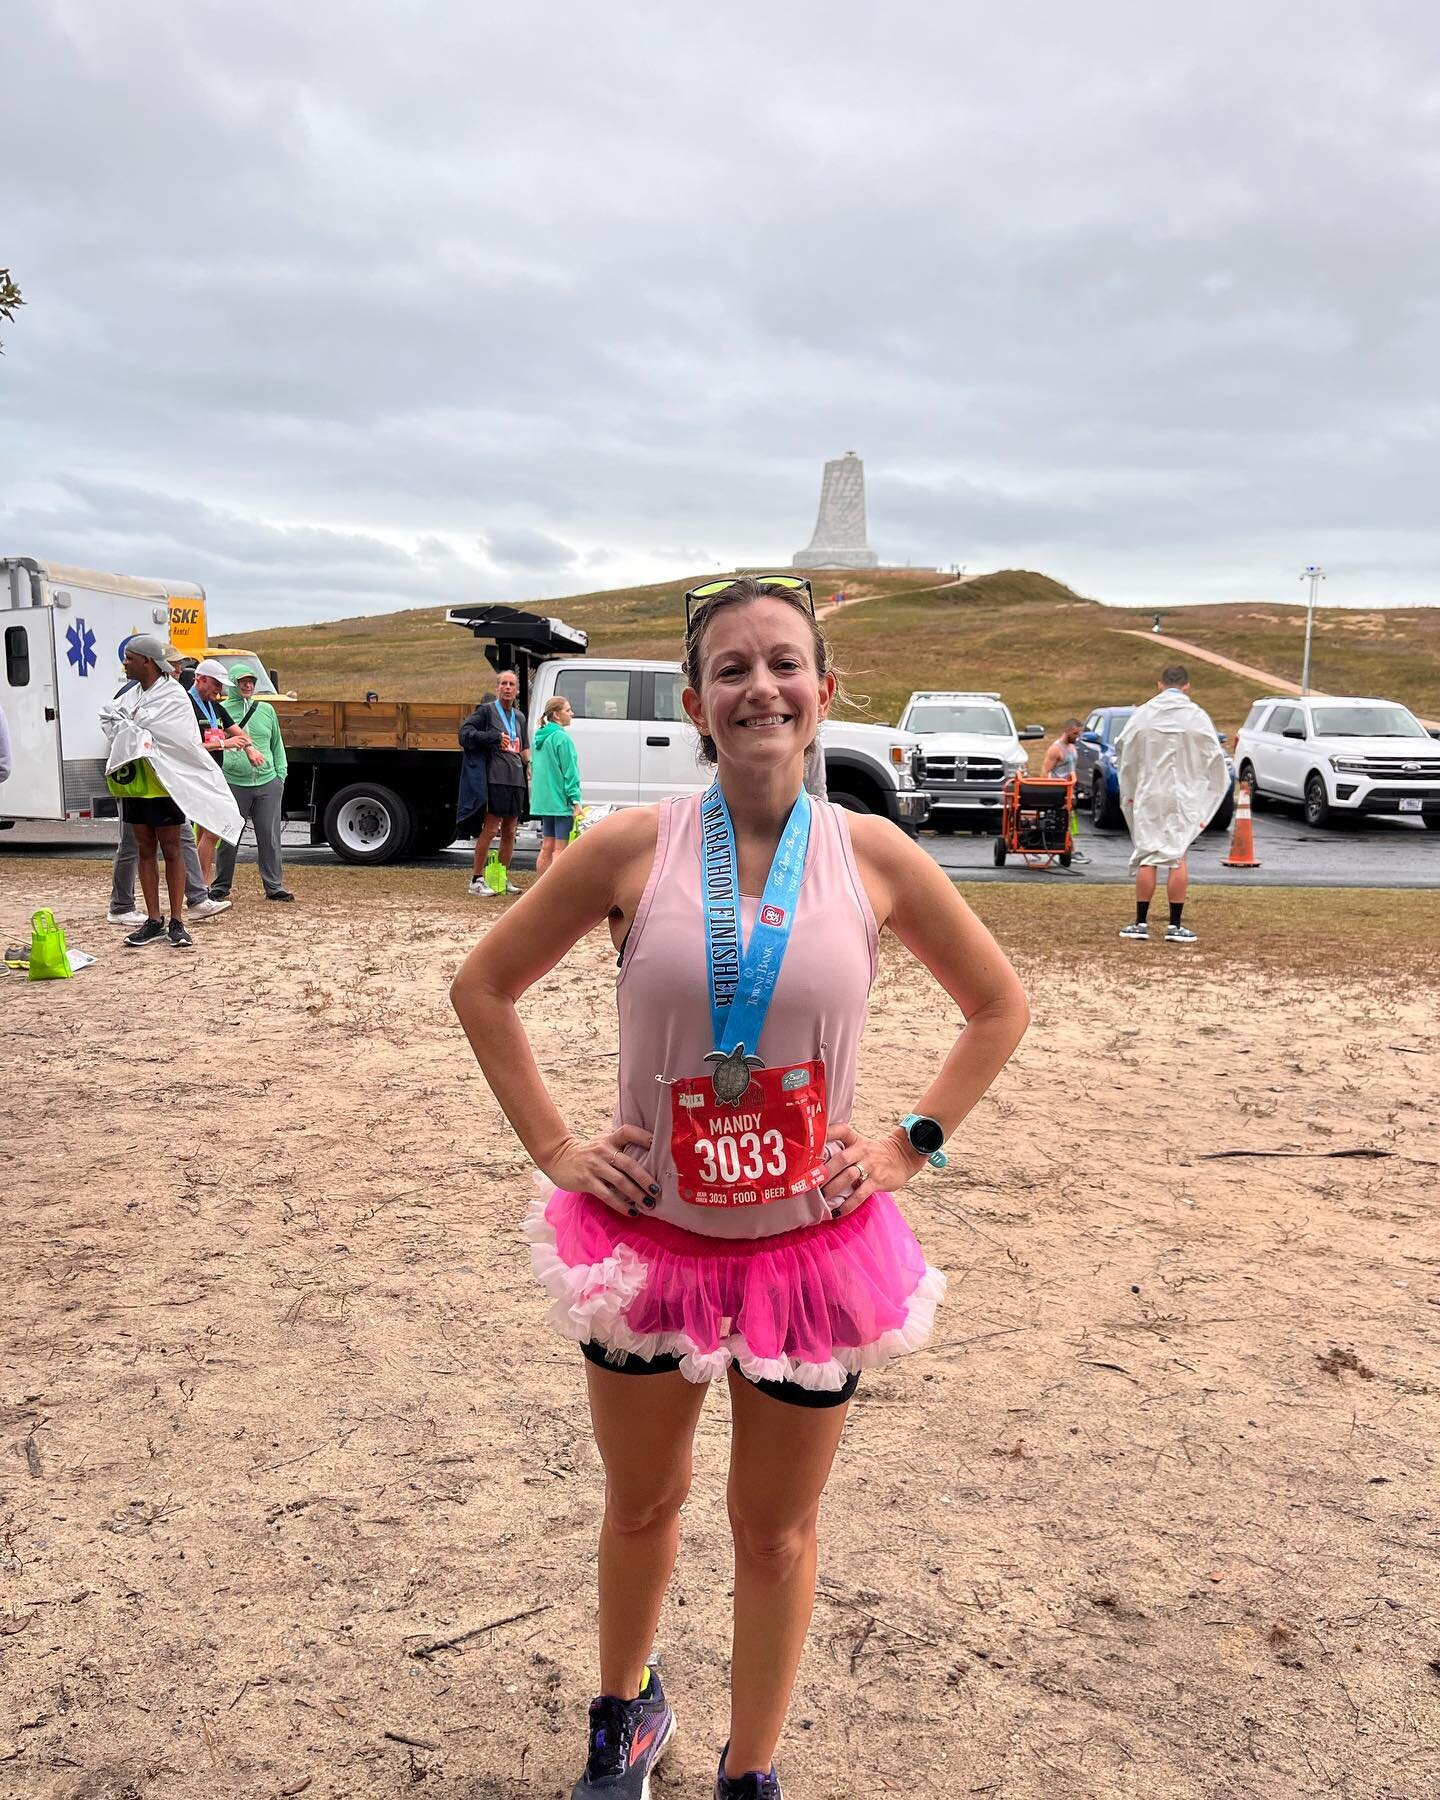 Congrats to @mandyfernandy14 for racing hard during some pretty rough conditions today at the OBX half marathon. She has made so much amazing progress and we can&rsquo;t wait to see her continue to get stronger and even faster! #crushendurance #coach